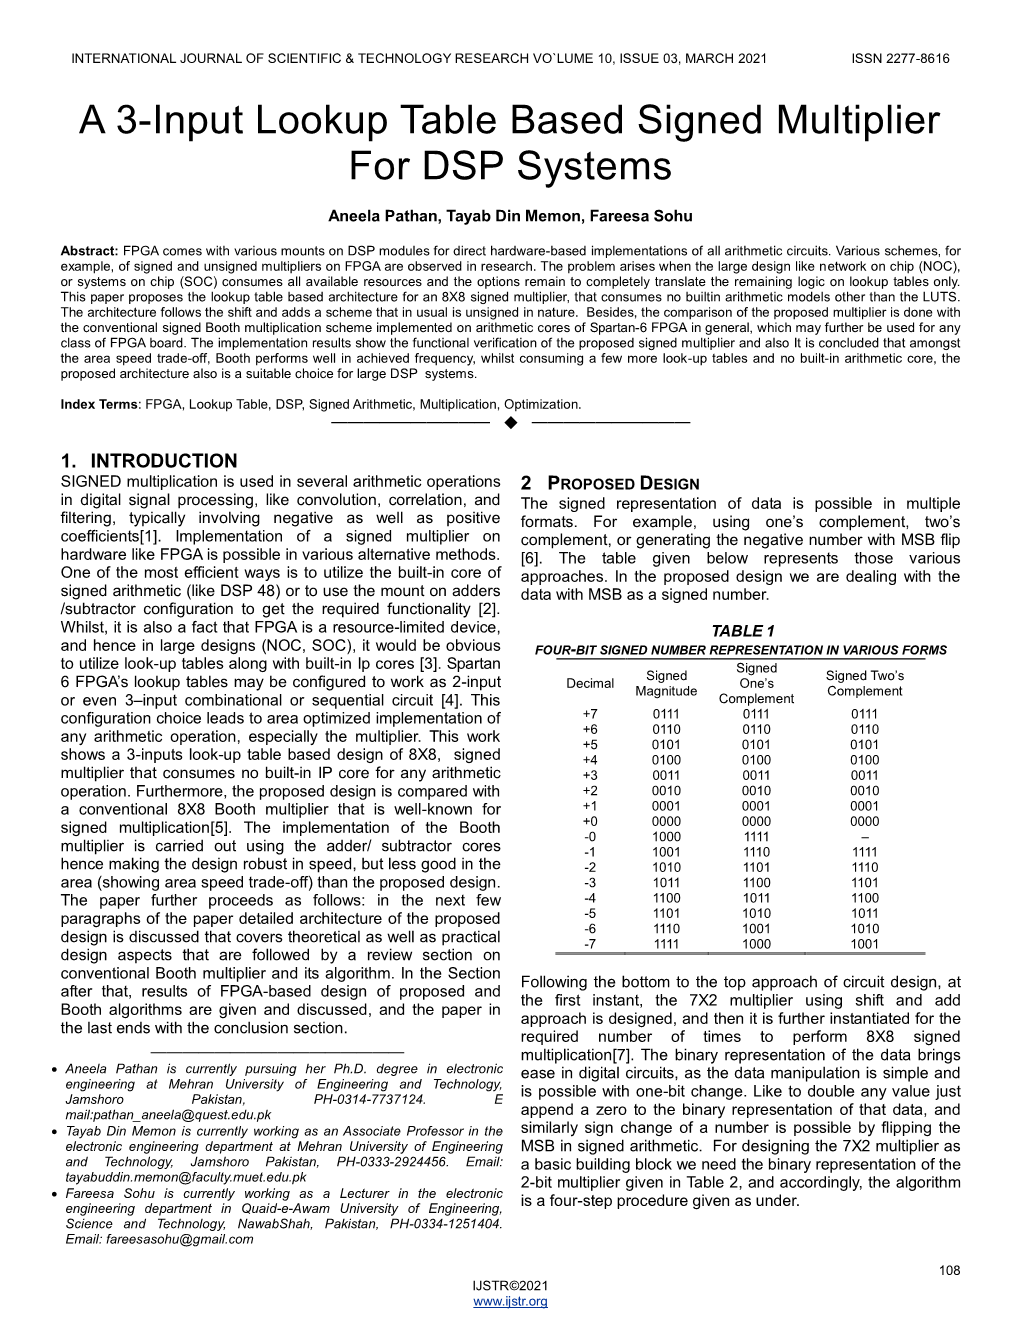 A 3-Input Lookup Table Based Signed Multiplier for DSP Systems